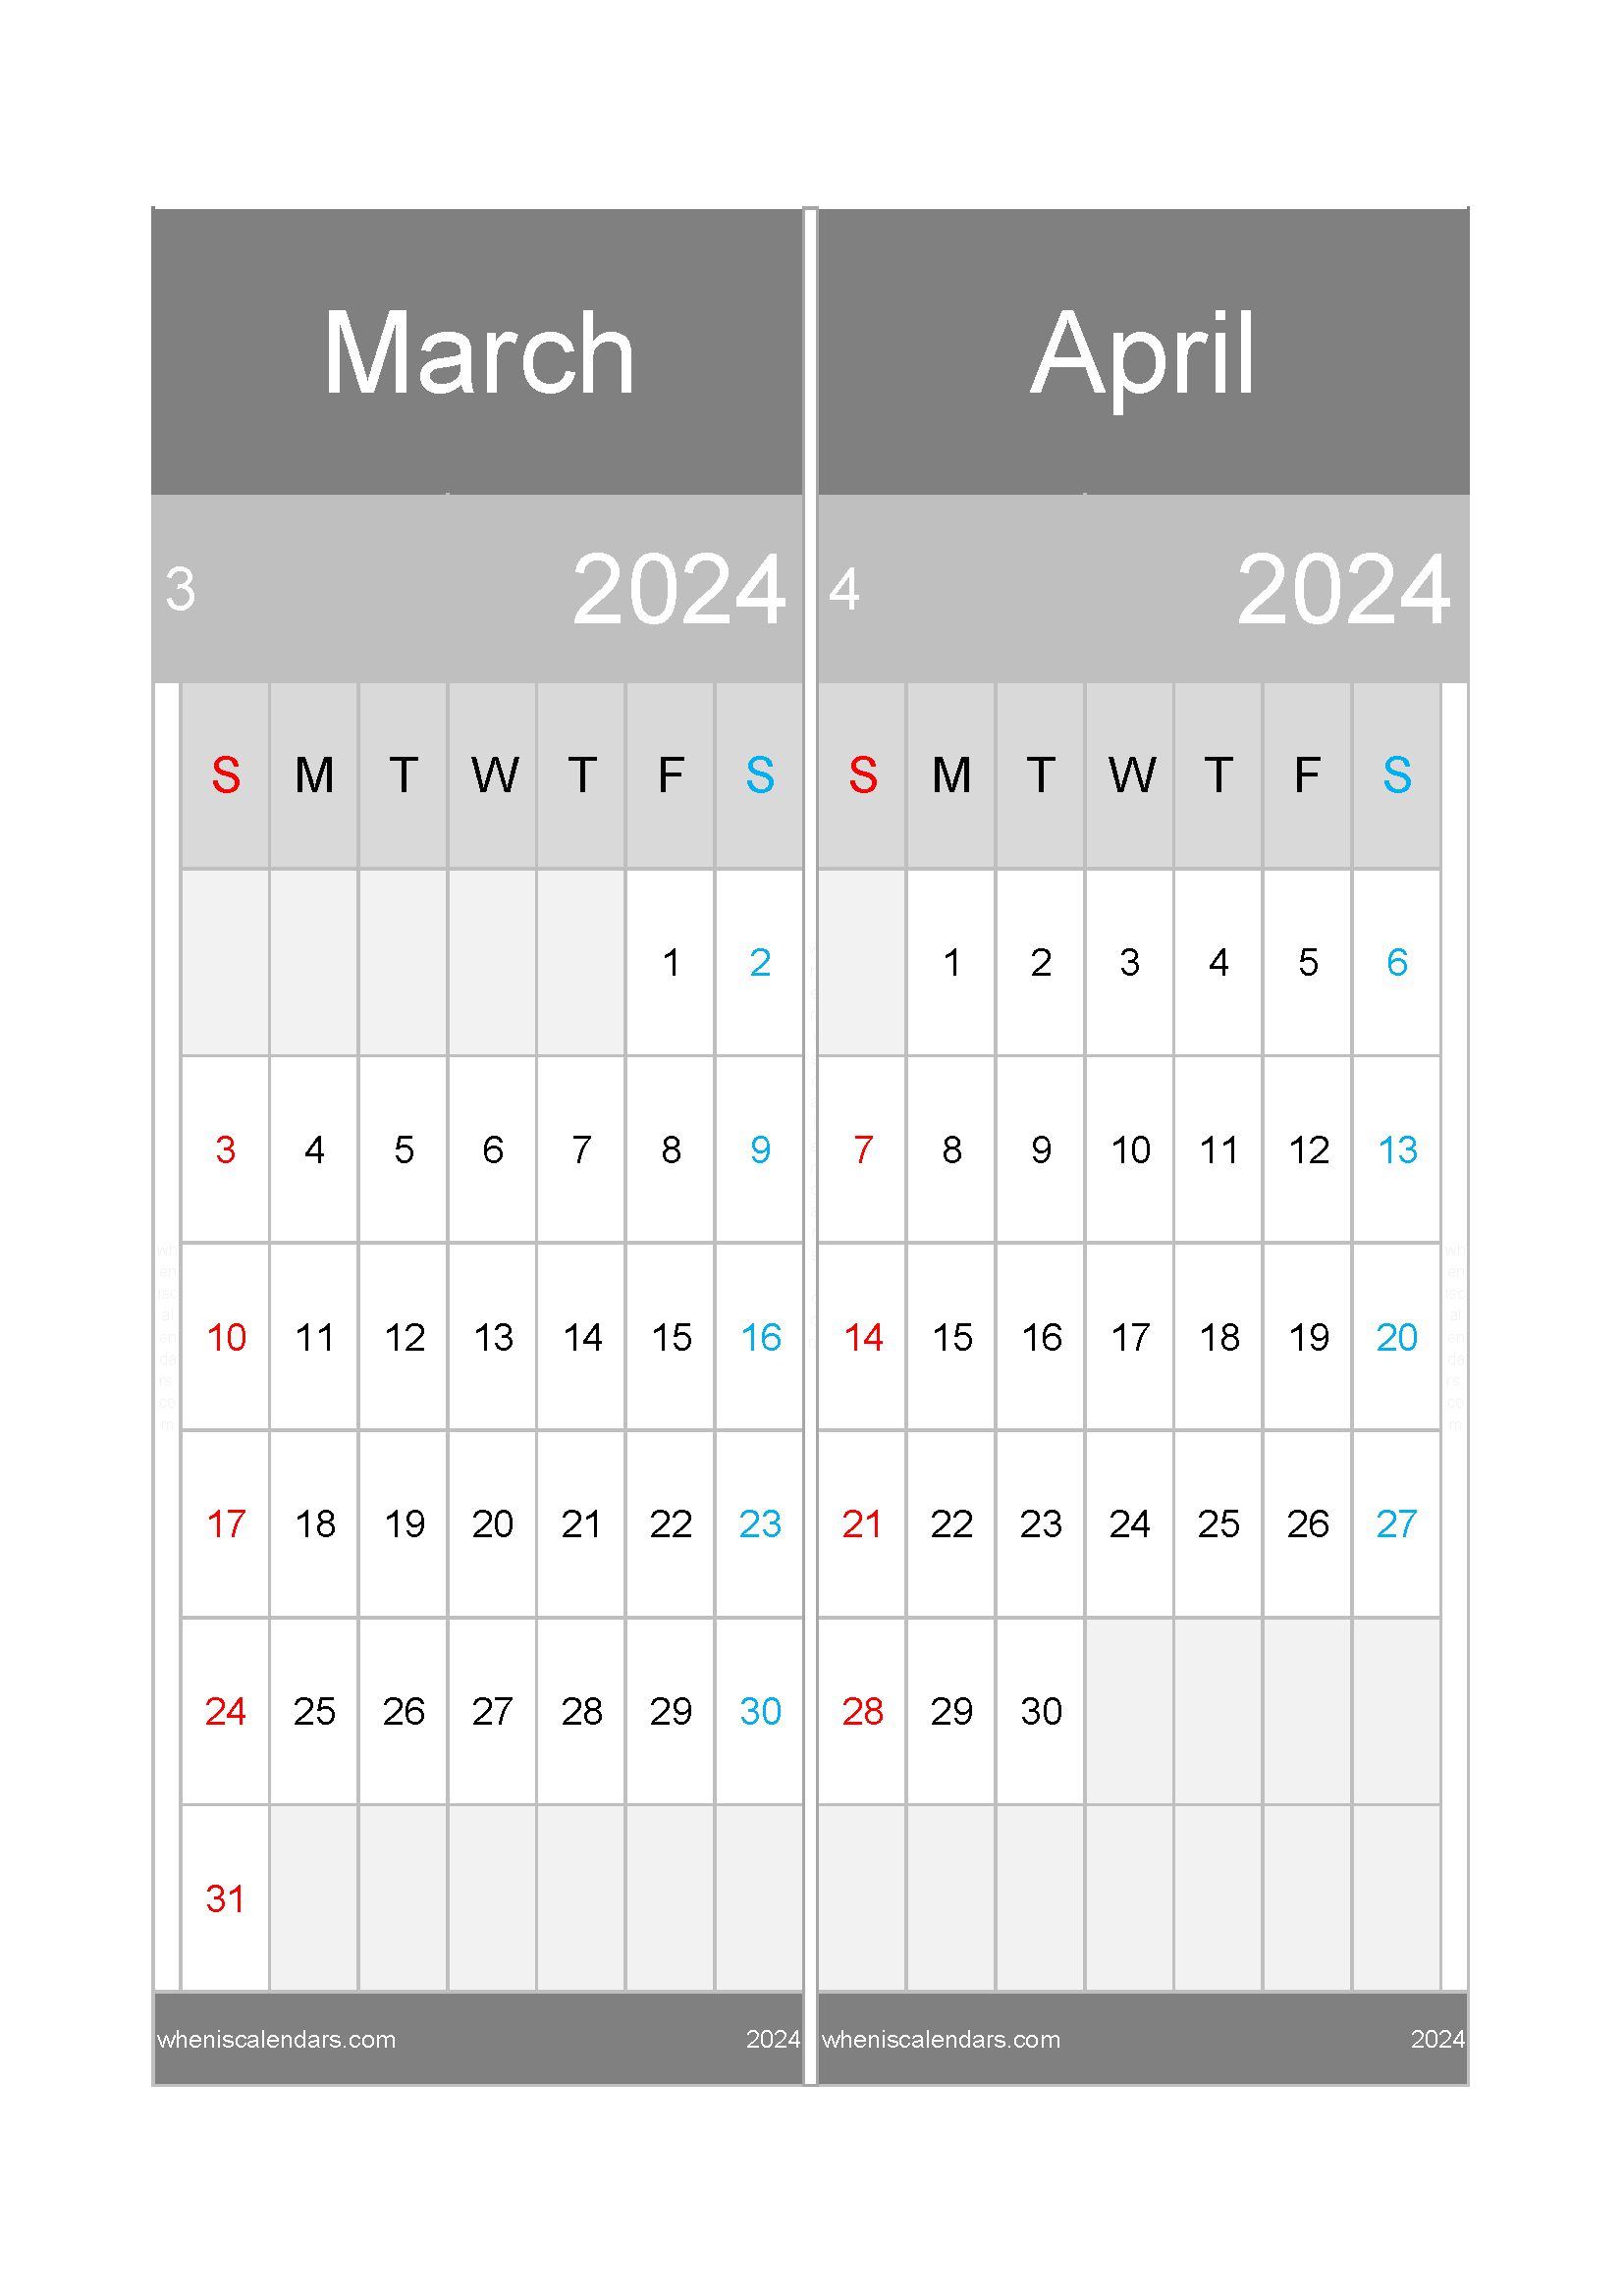 Download calendar for March and April 2024 A4 MA24019